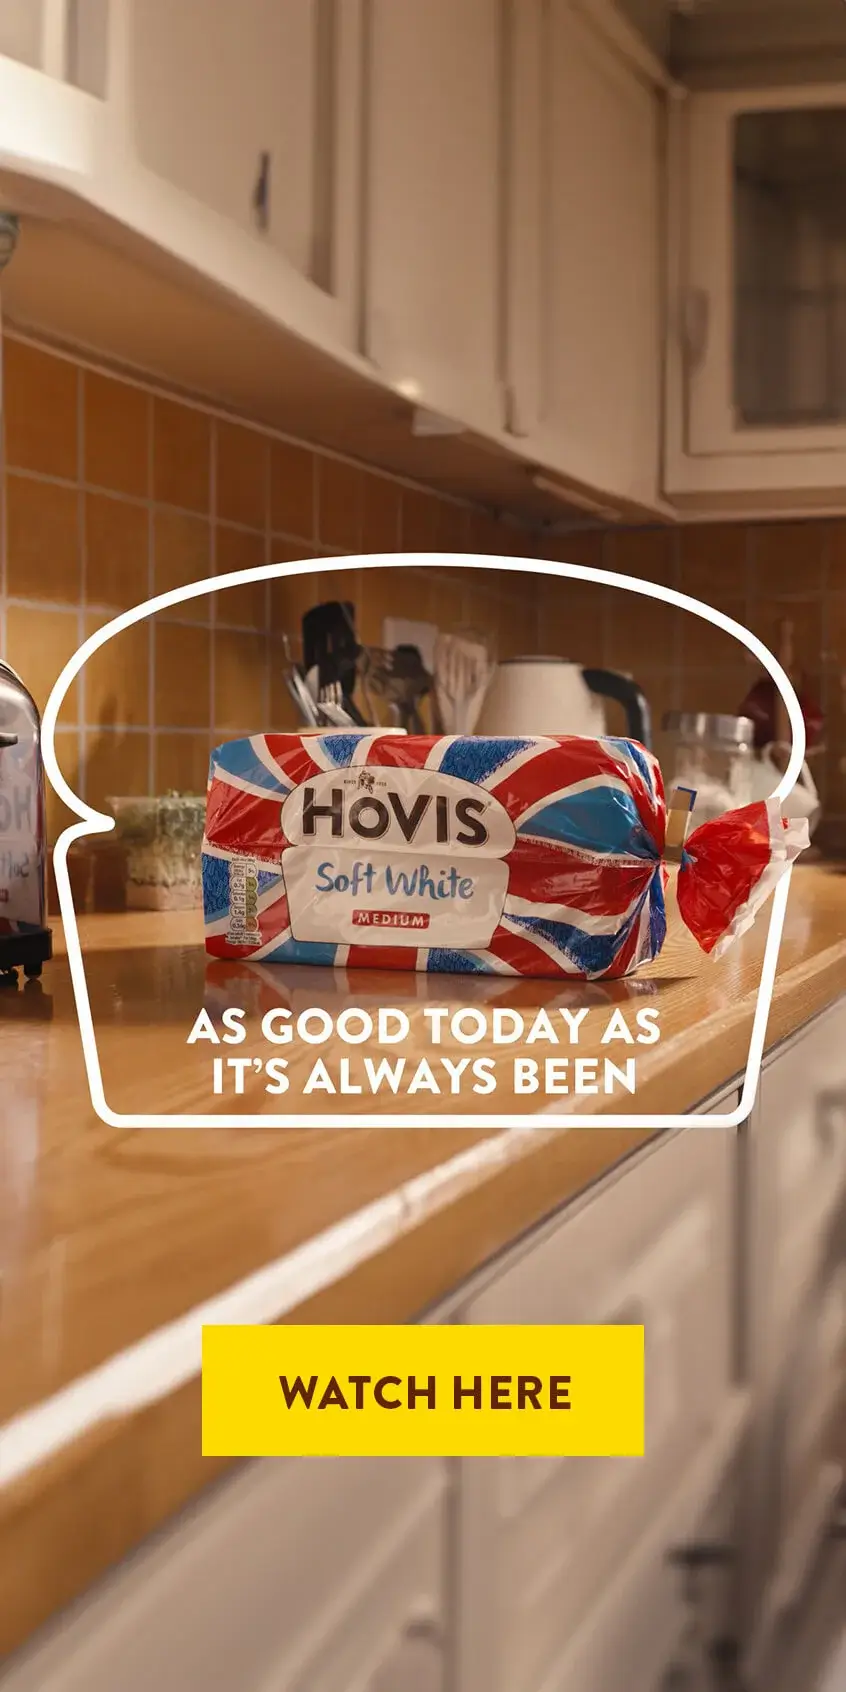 Hovis - Food For Life Since 1866